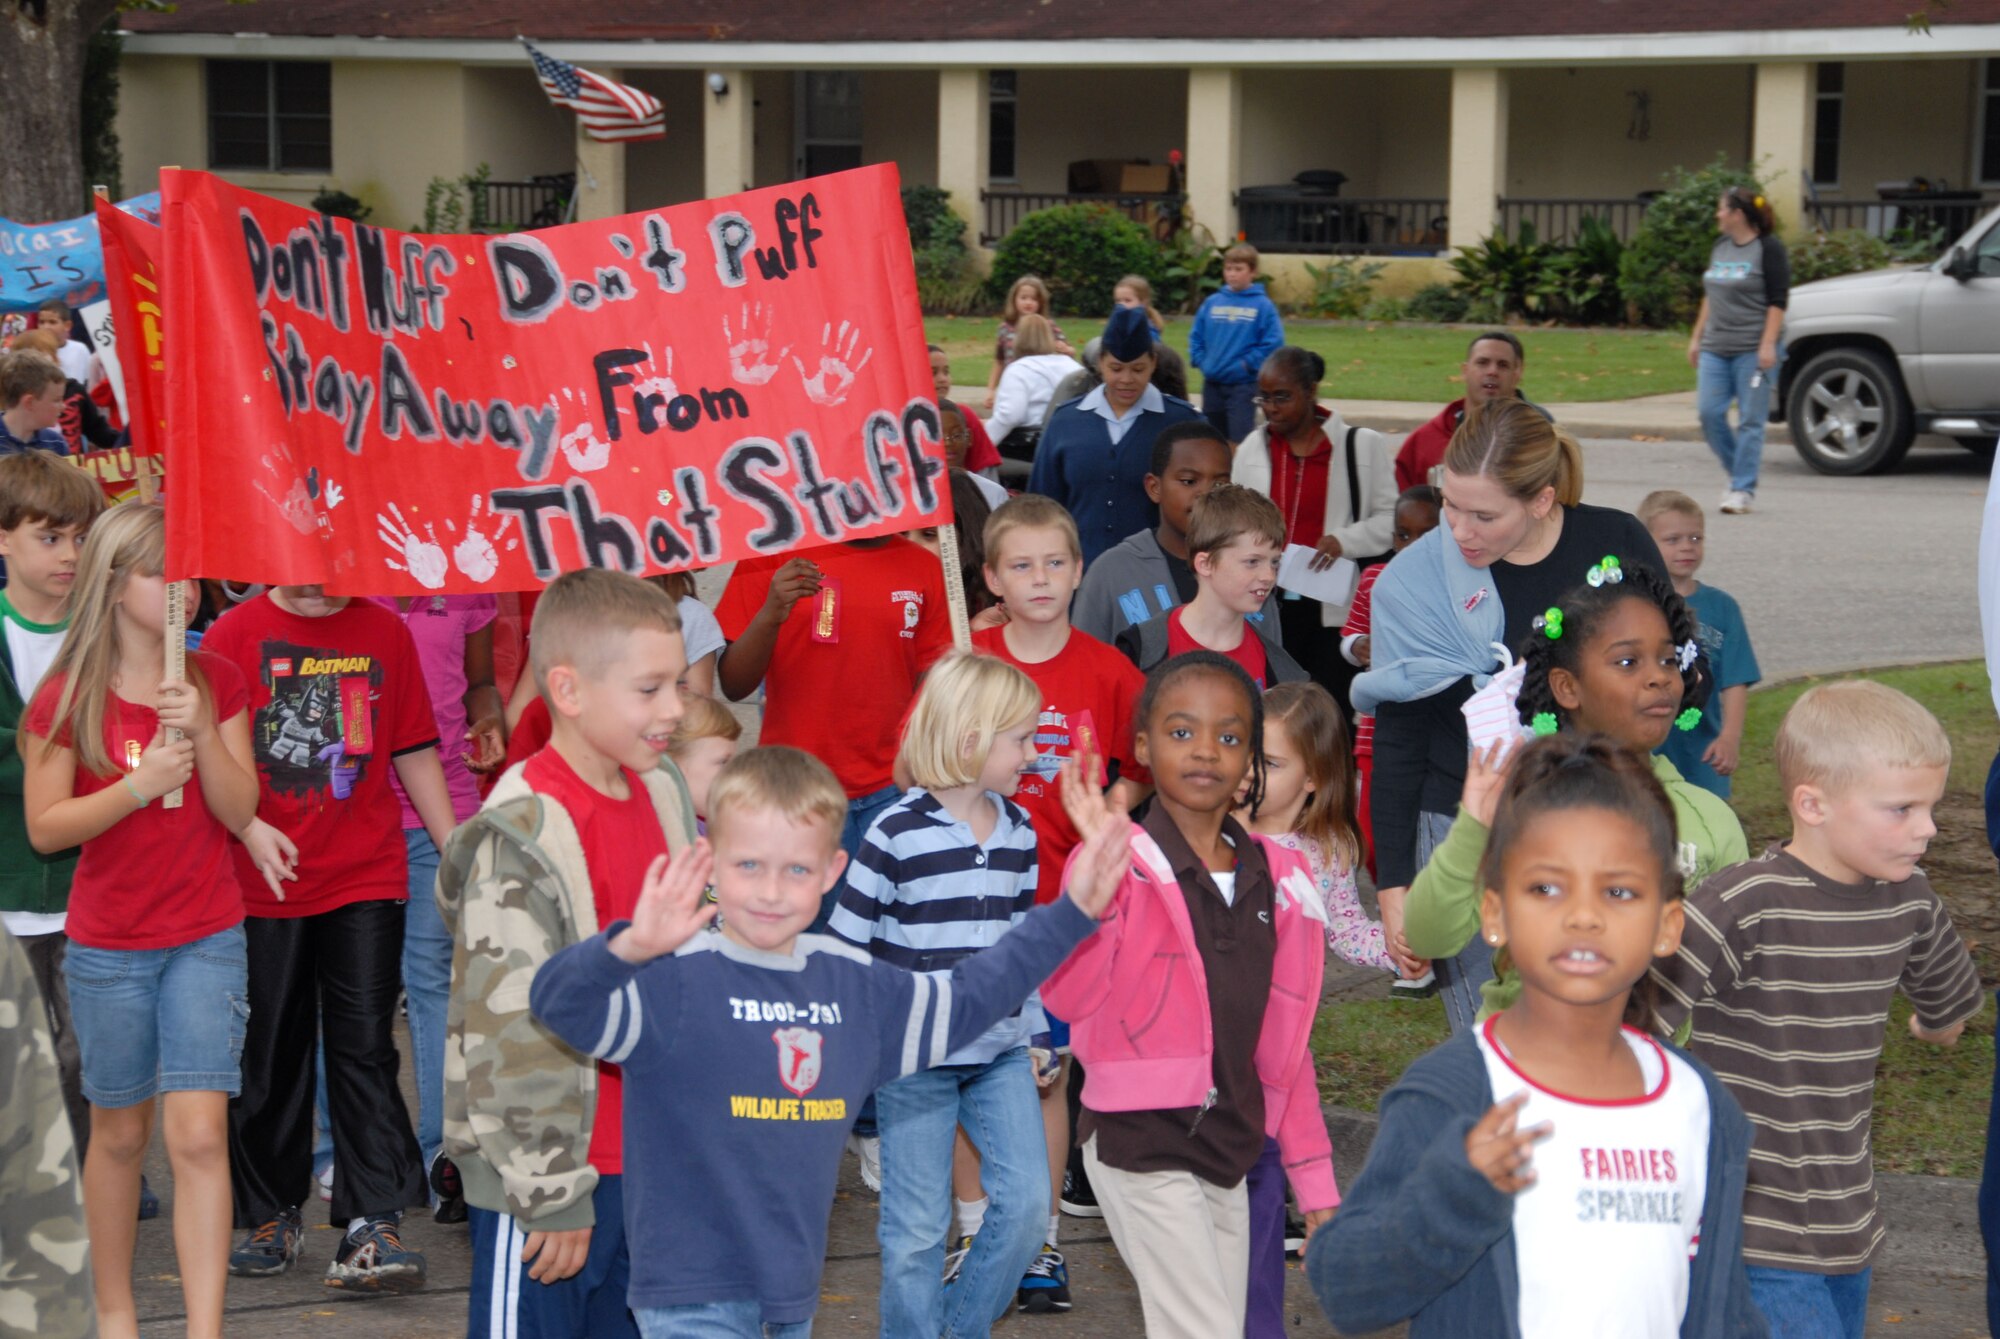 As part of the national Red Ribbon Week, students from Maxwell Elementary School “marched away from drugs” with a parade down Maxwell’s Magnolia Street to the base arboretum Monday. At the arboretum, the students placed red ribbons around the trees and pledged to stay drug free. Normally held the last week in October, Red Ribbon Week is a national campaign for drug prevention. (U.S. Air Force photo/Bud Hancock)

